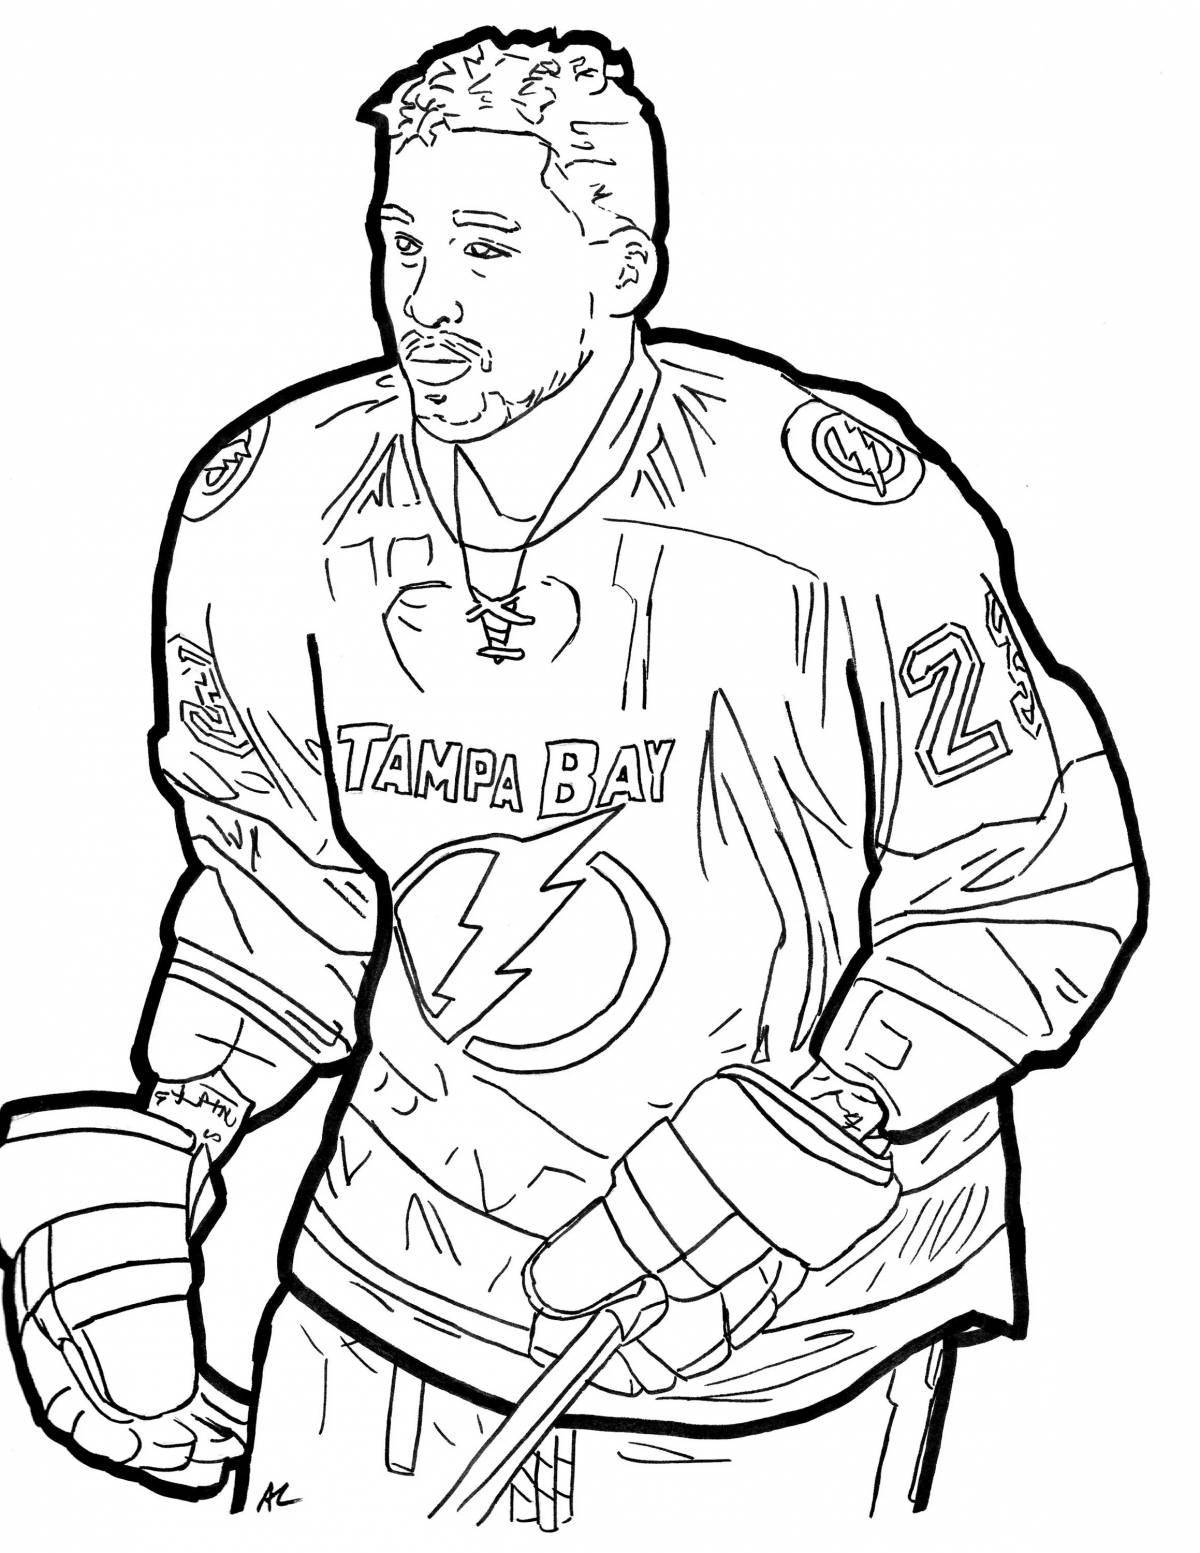 Khl hockey coloring page bright